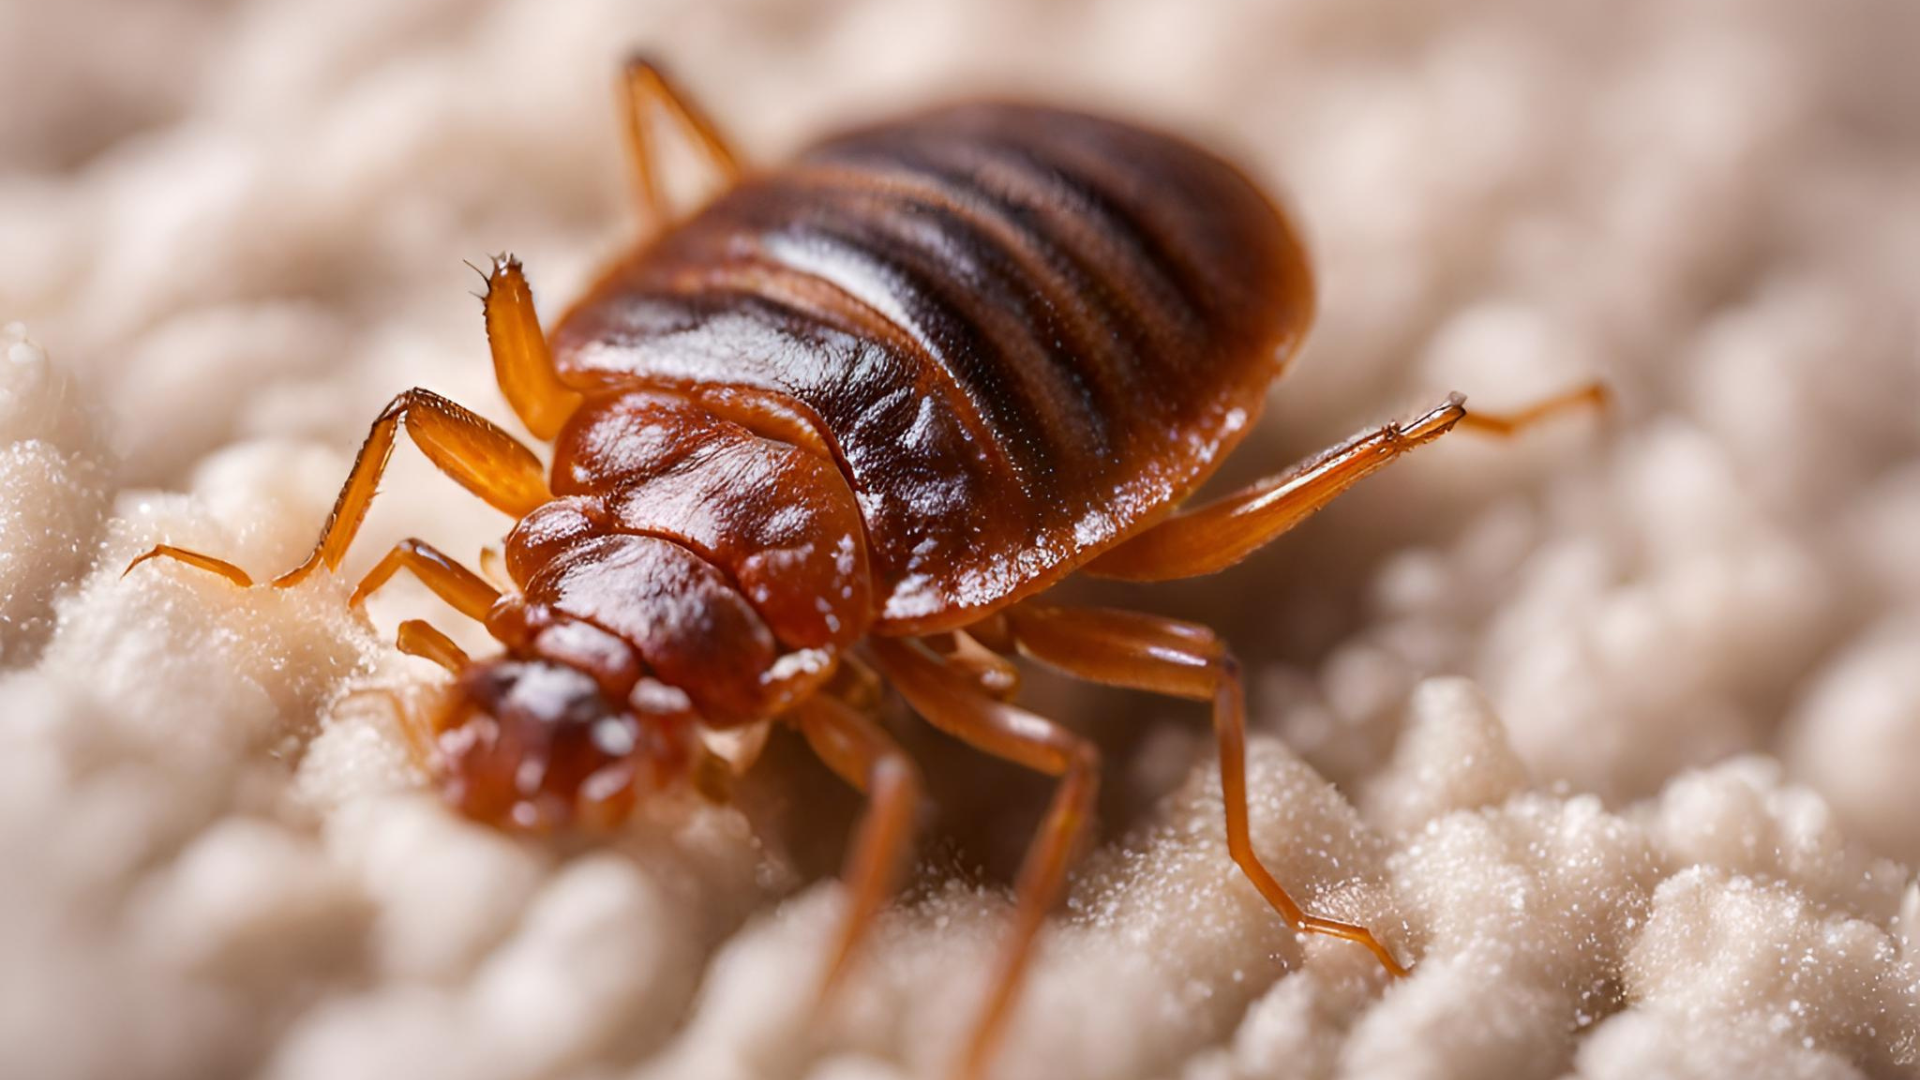 Adult bed bugs are visible to the naked eye